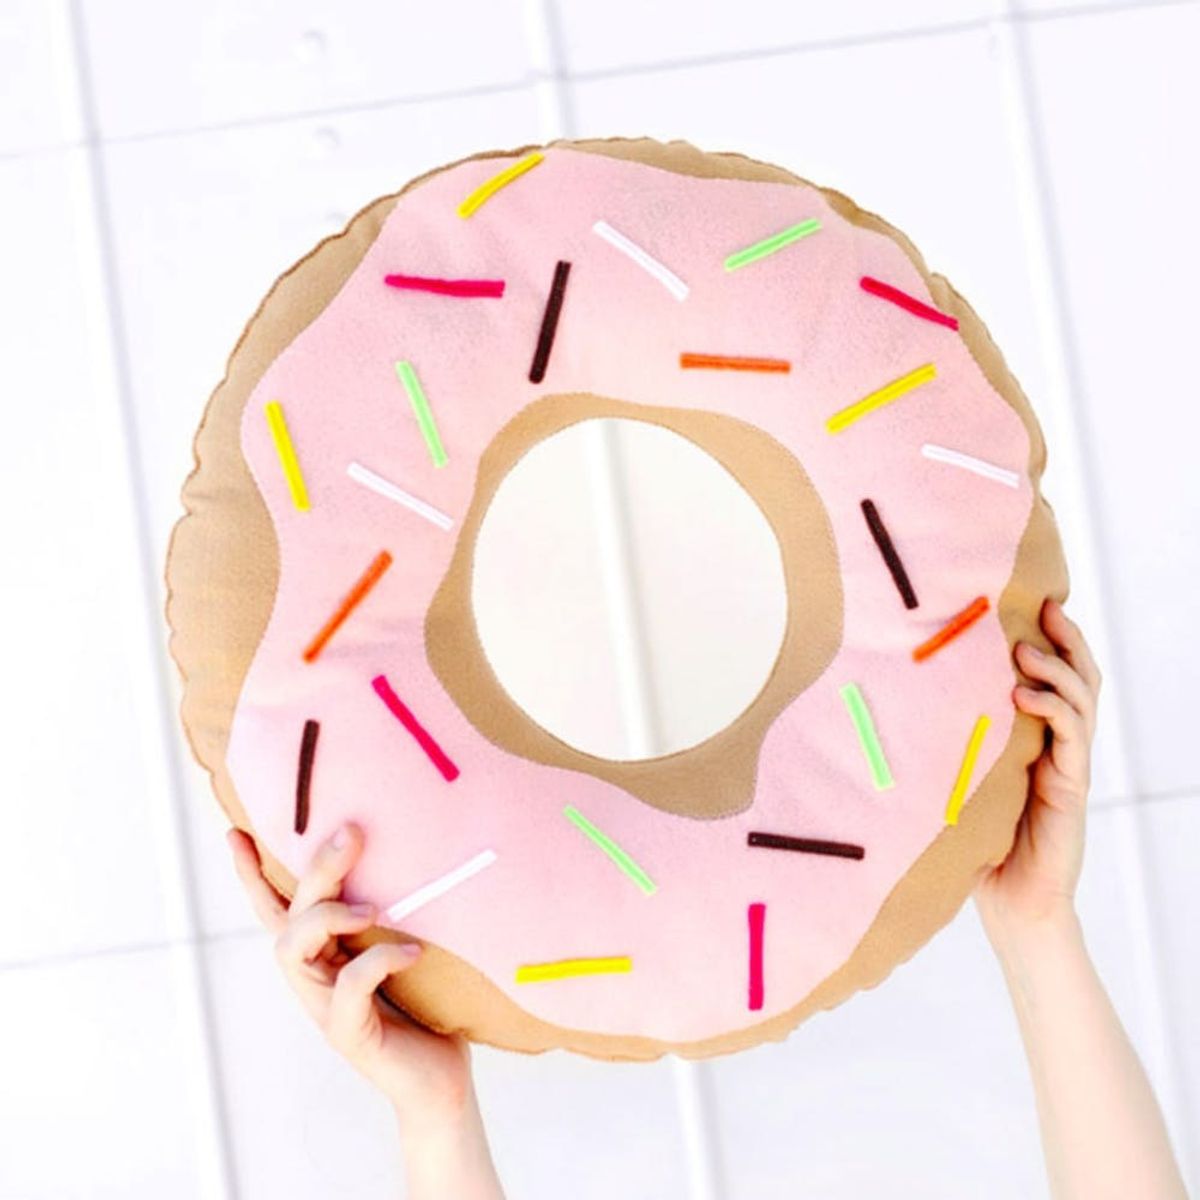 15 Drool-Worthy Donut Decor Items You NEED in Your Life!